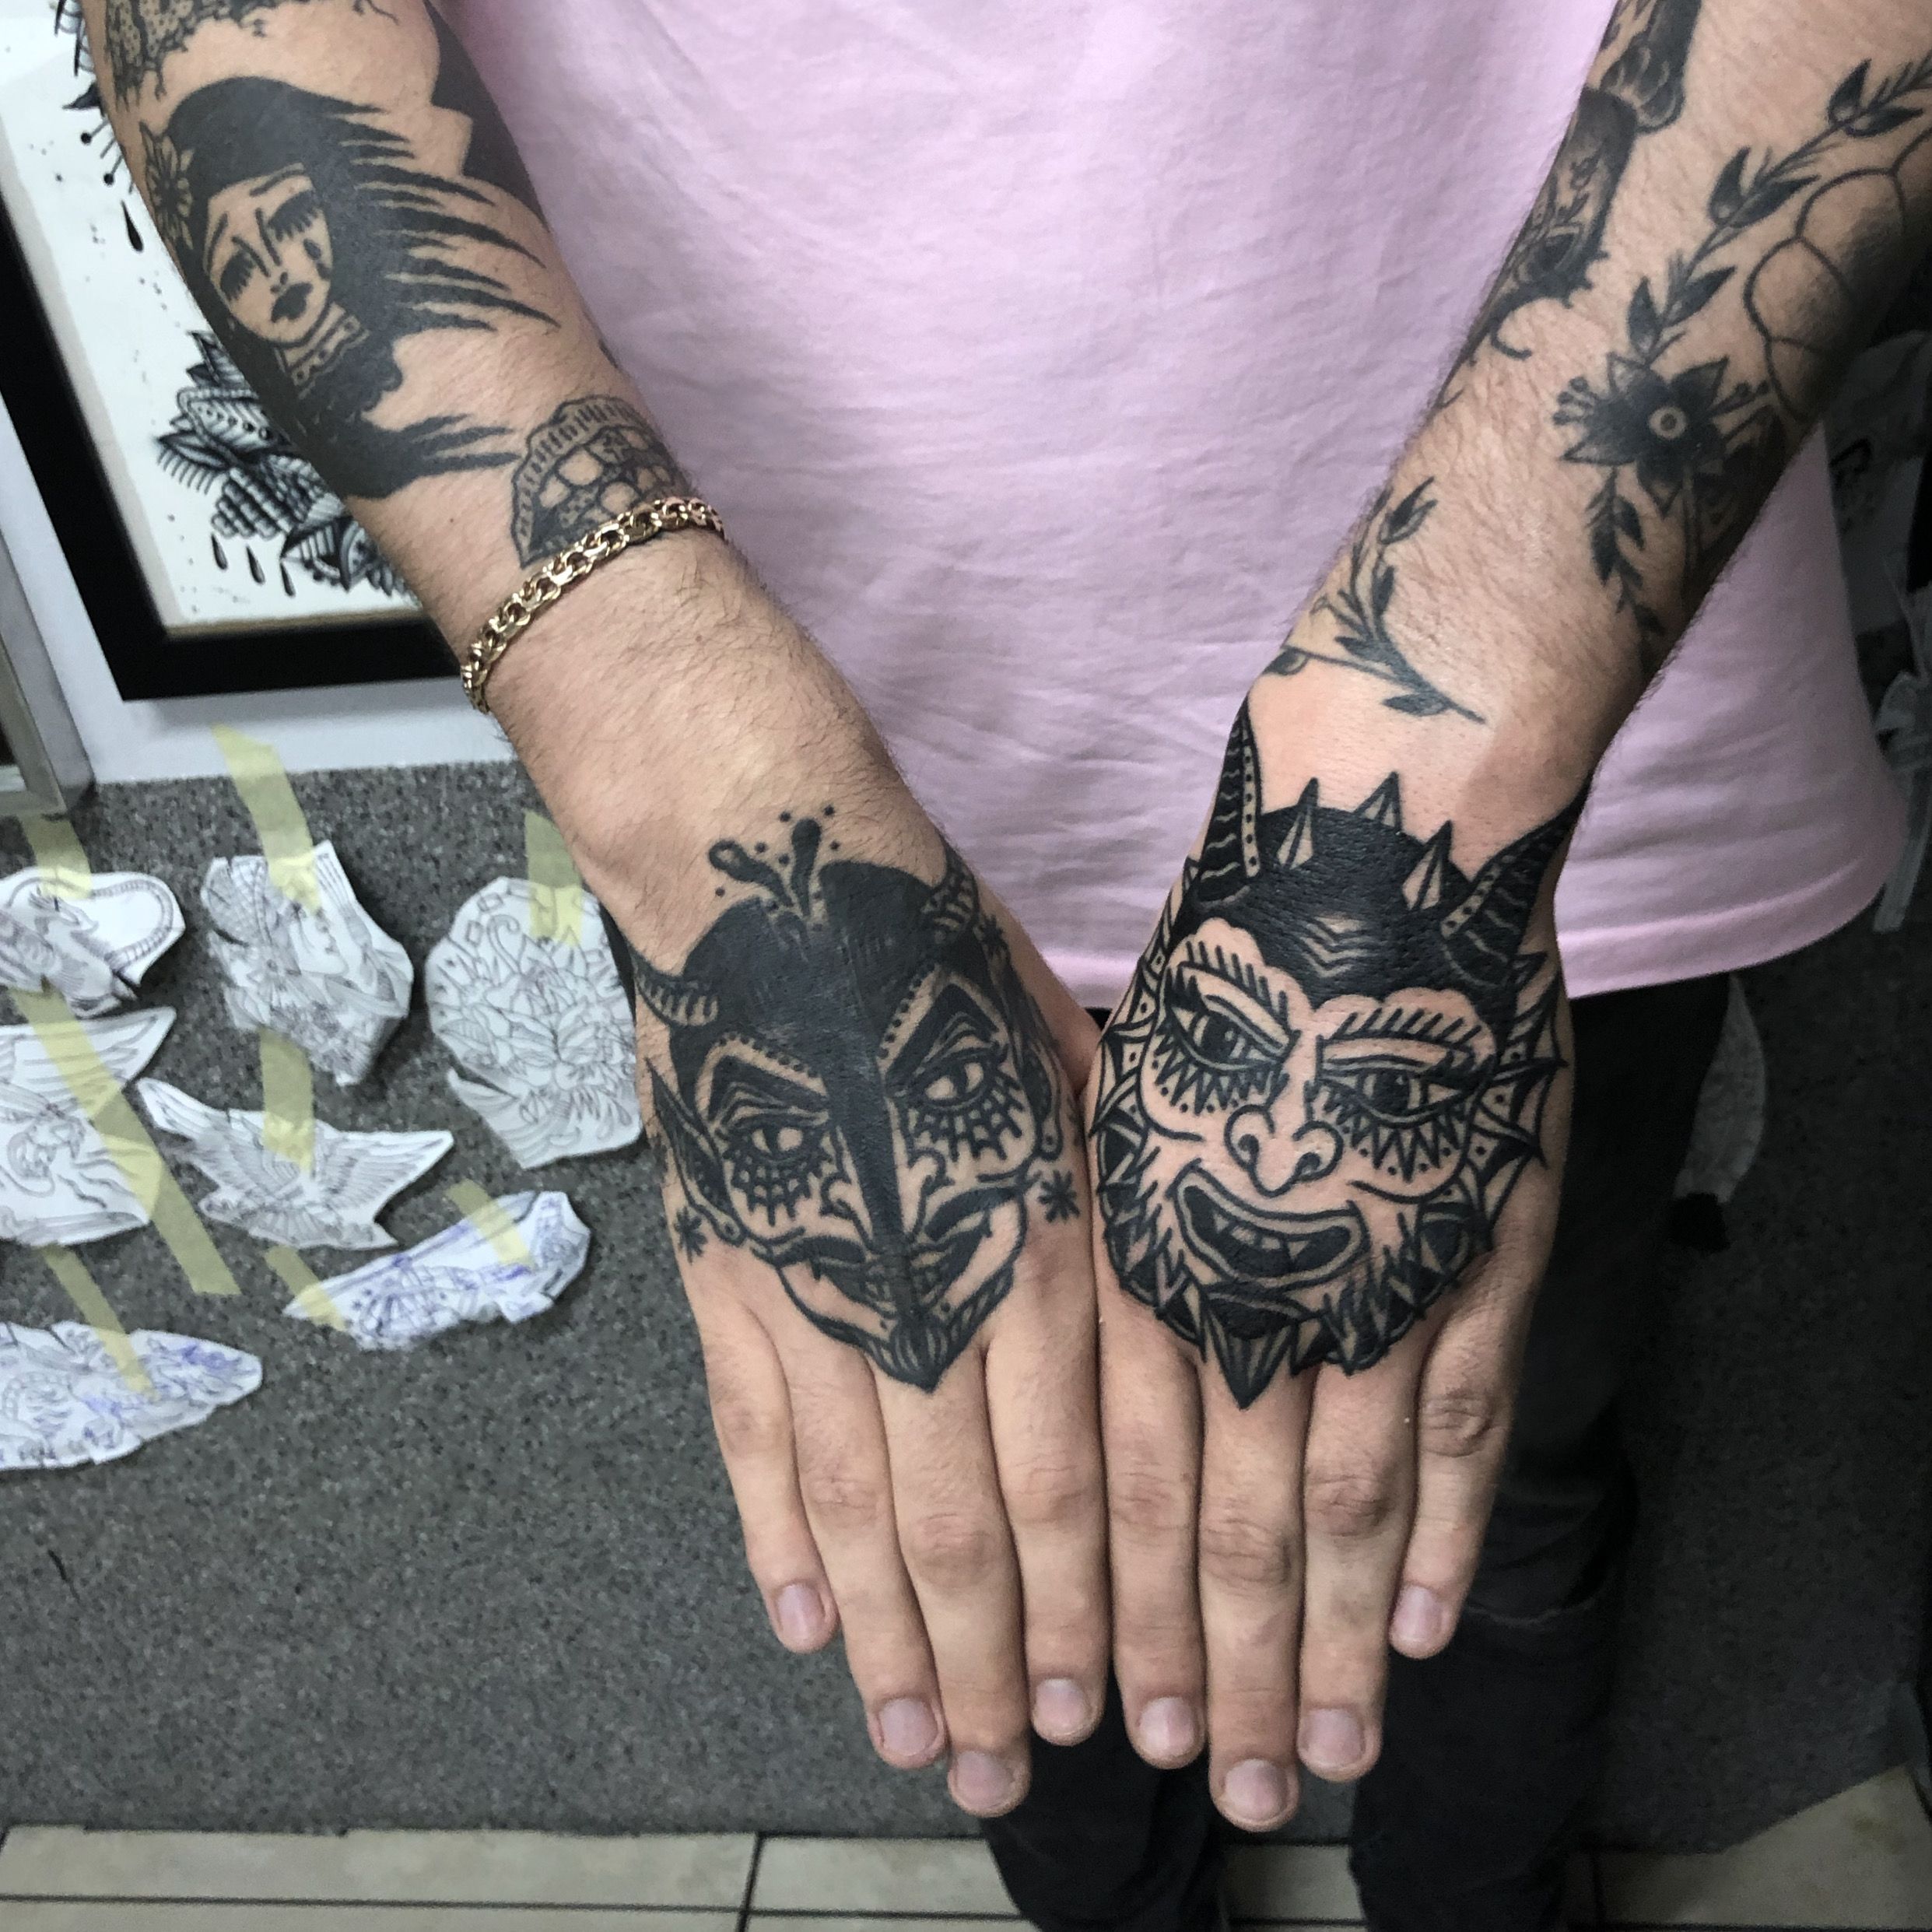 150 Gothic Tattoo Ideas That Show Off Your Dark Side